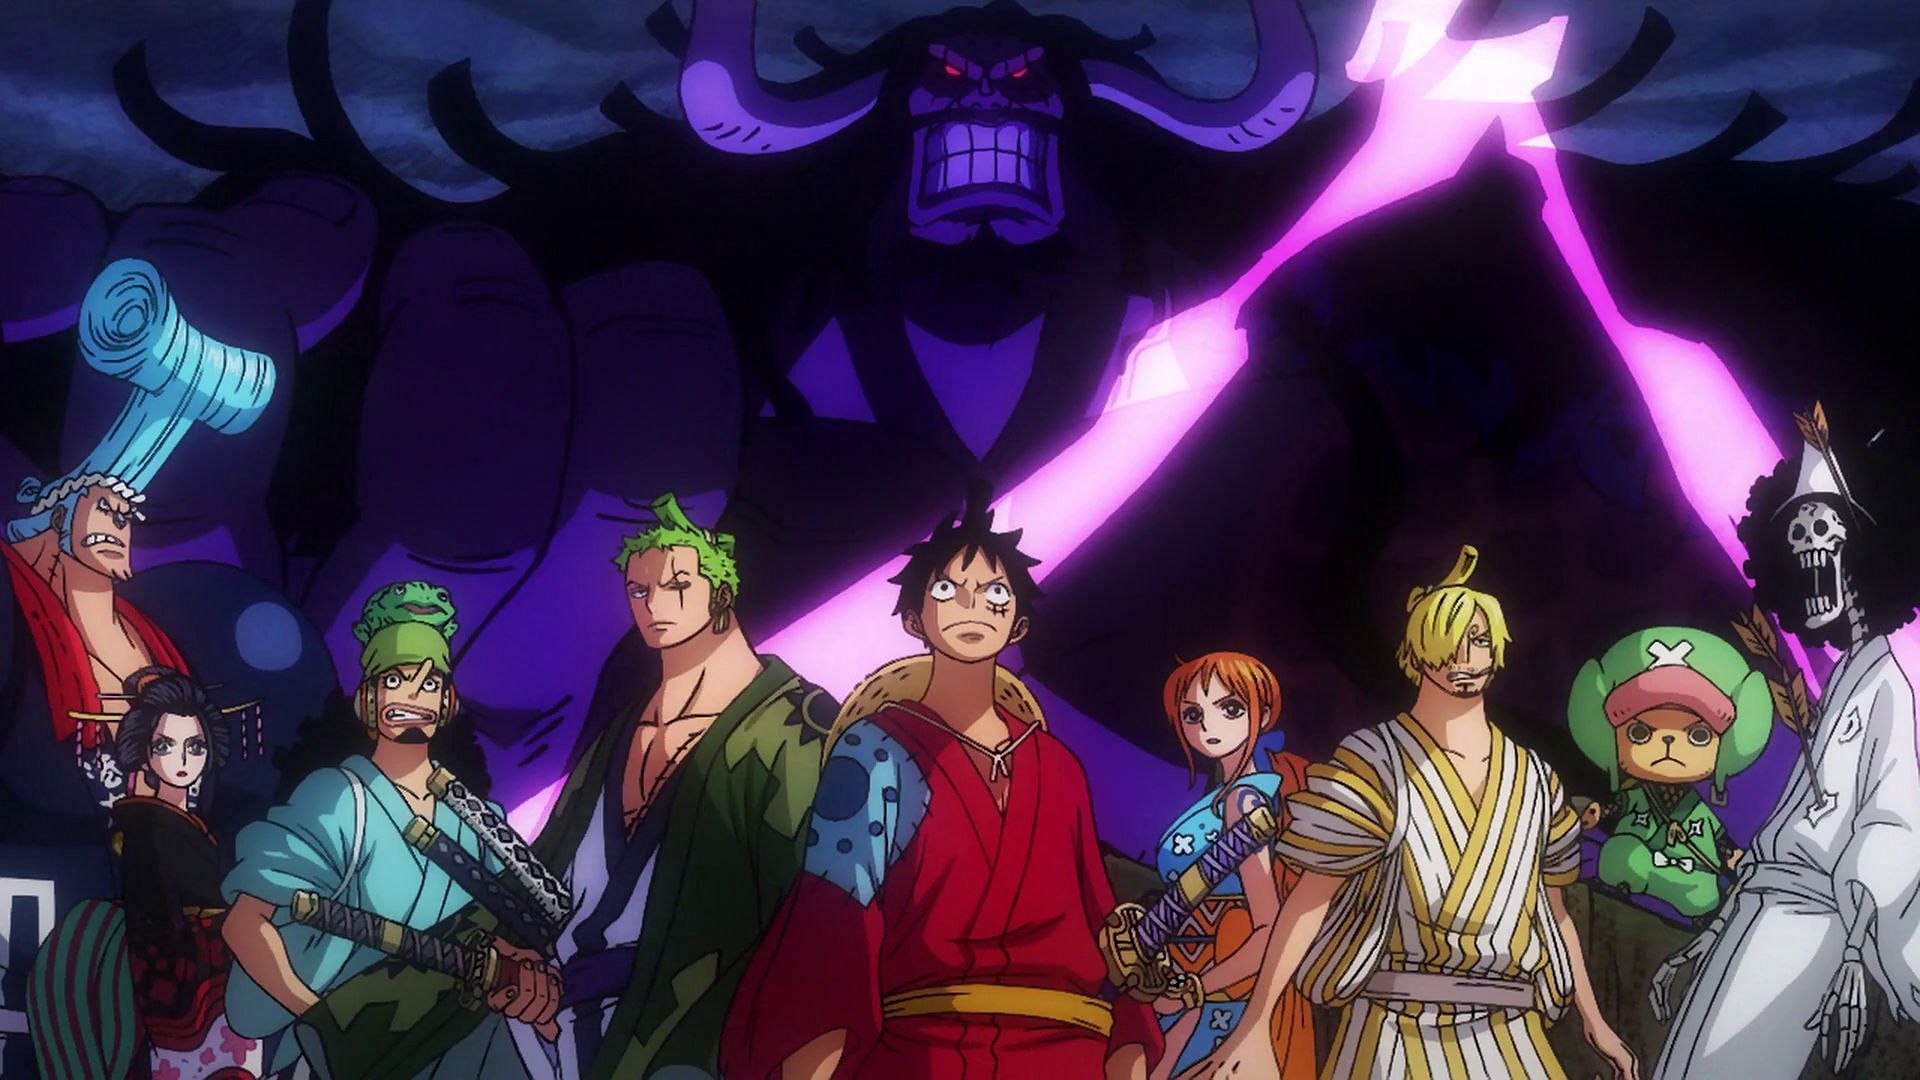 The Strawhats Pirates and Kaido, some of the main protagonists of One Piece